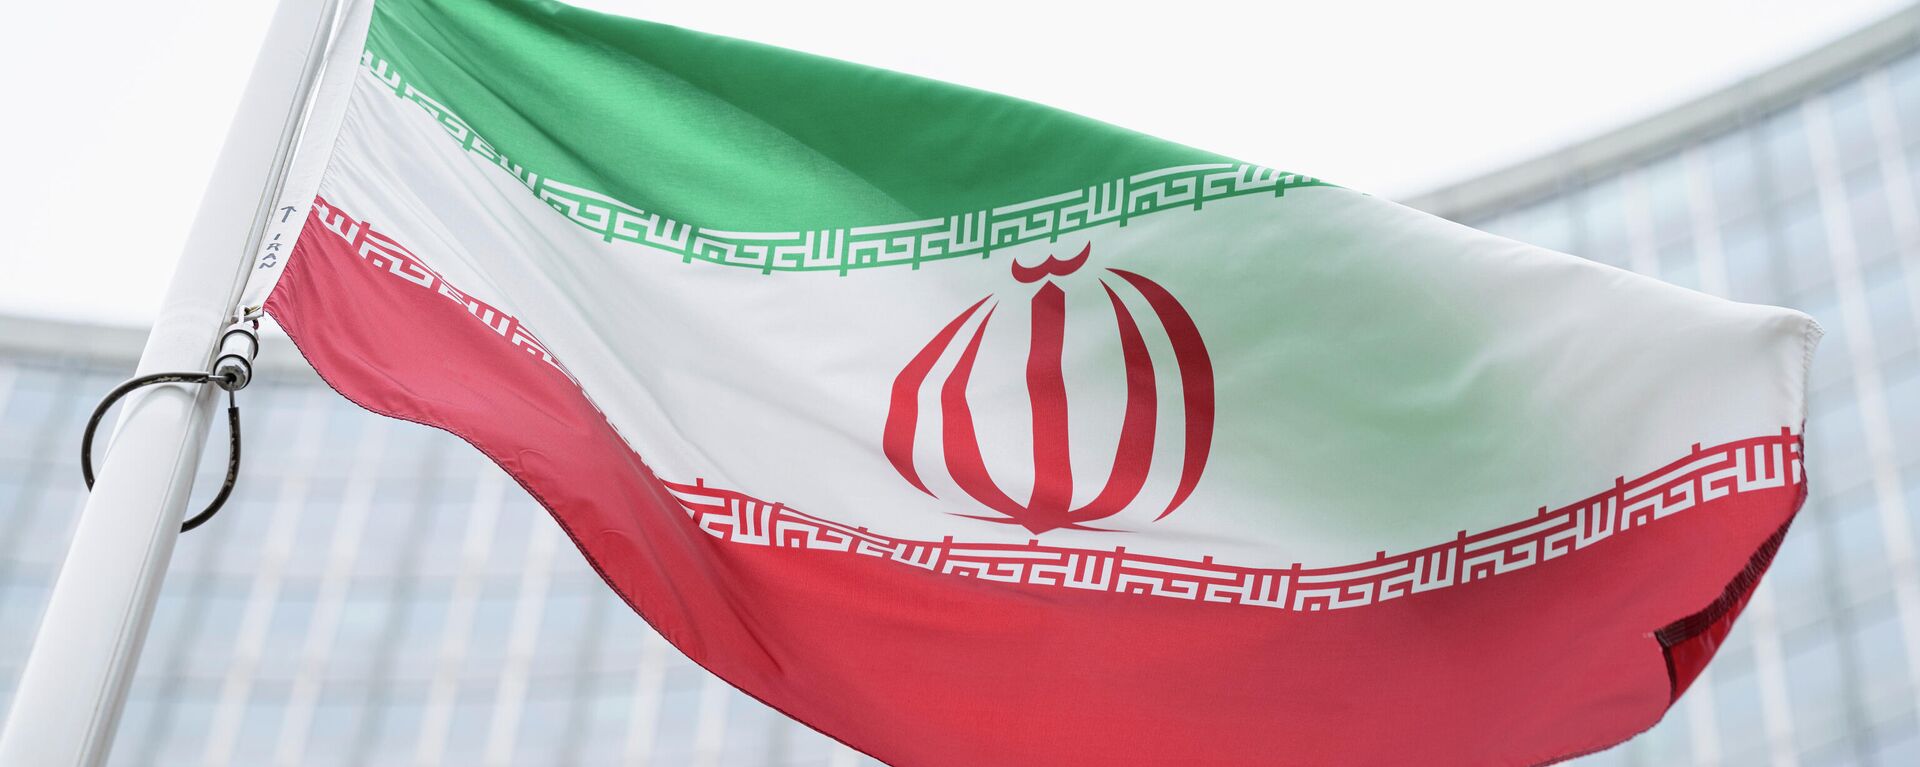 FILE - The flag of Iran waves in front of the the International Center building with the headquarters of the International Atomic Energy Agency, IAEA, in Vienna, AustriaI, May 24, 2021. On Monday, Nov. 29, 2021, negotiators are gathering in Vienna to resume efforts to revive Iran's 2015 nuclear deal with world powers, with hopes of quick progress muted after the arrival of a hard-line new government in Tehran led to a more than five-month hiatus. (AP Photo/Florian Schroetter, FILE) - Sputnik International, 1920, 14.10.2022